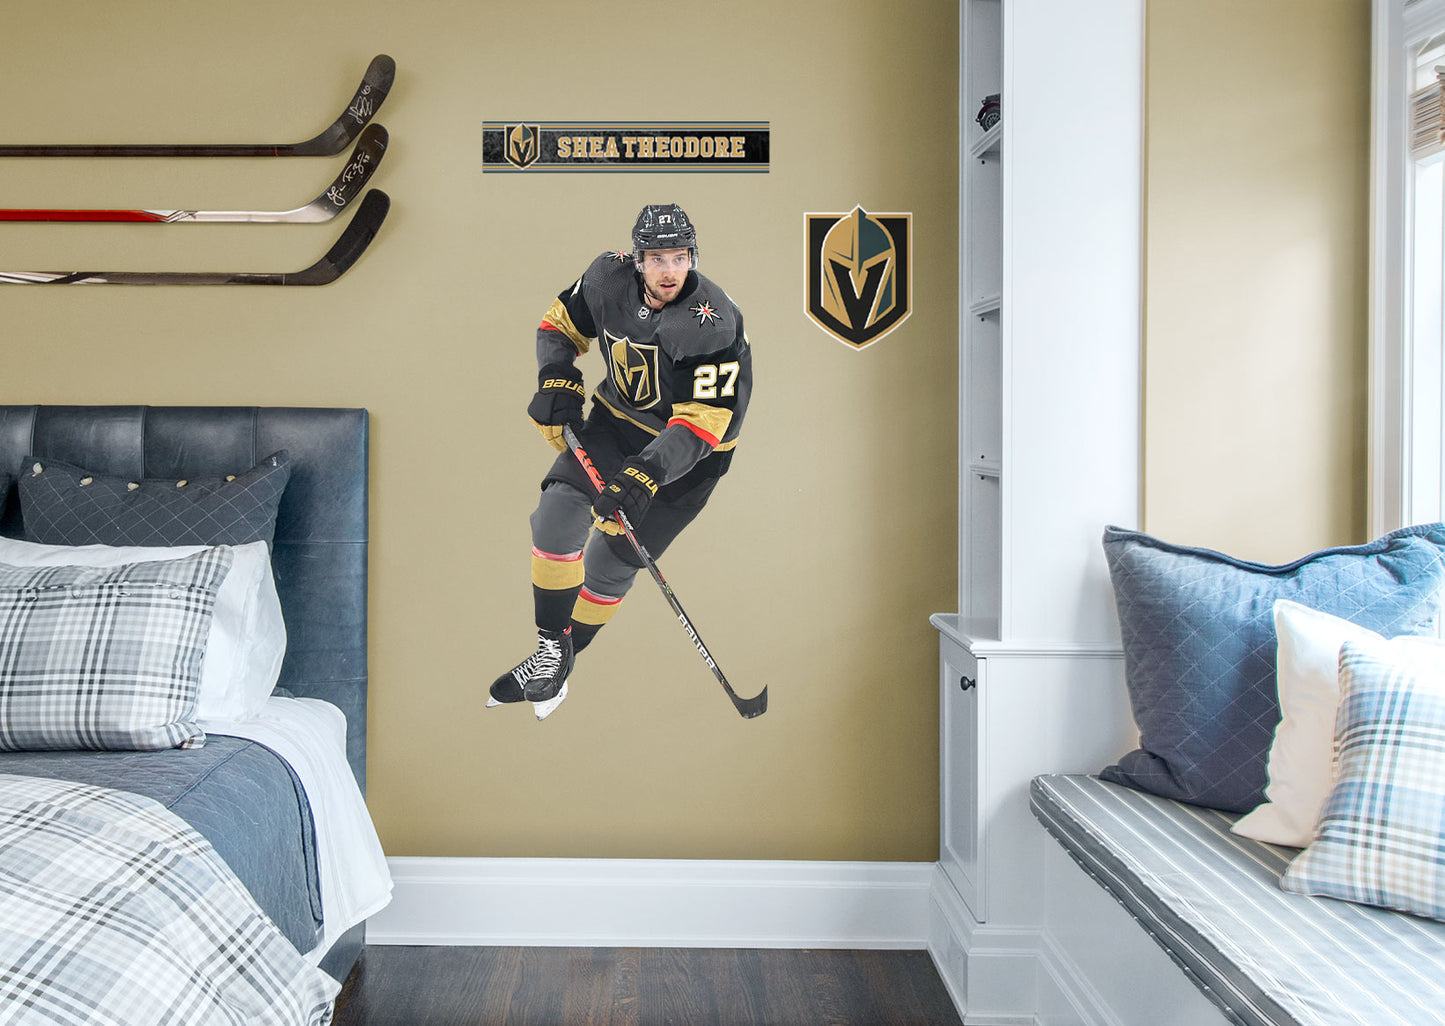 Vegas Golden Knights: Shea Theodore         - Officially Licensed NHL Removable Wall   Adhesive Decal